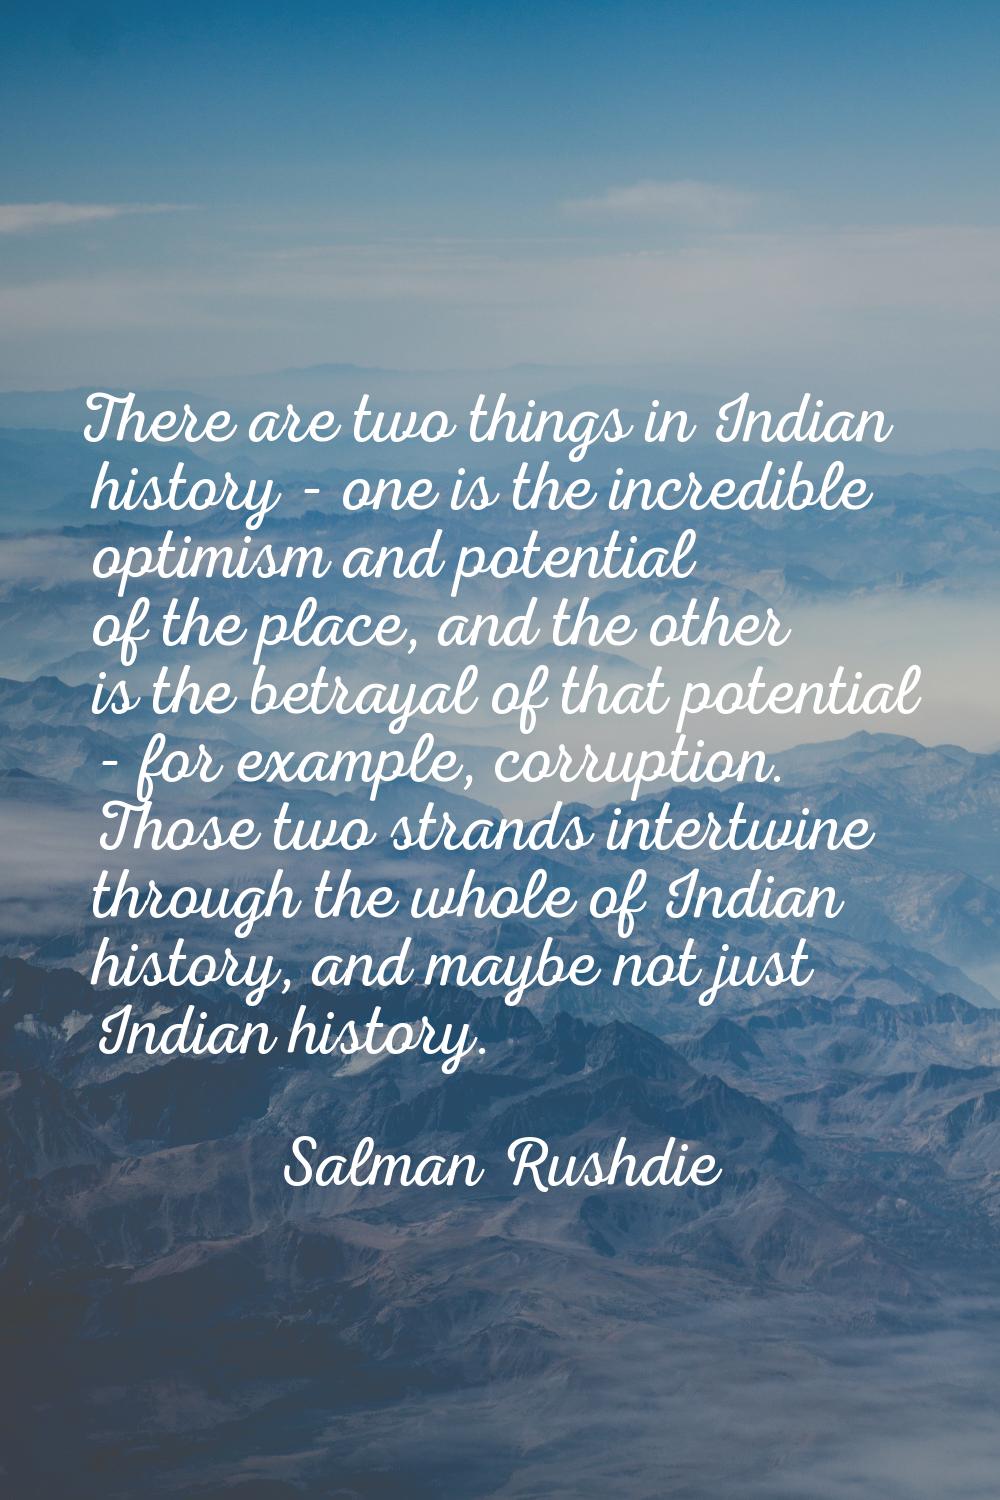 There are two things in Indian history - one is the incredible optimism and potential of the place,